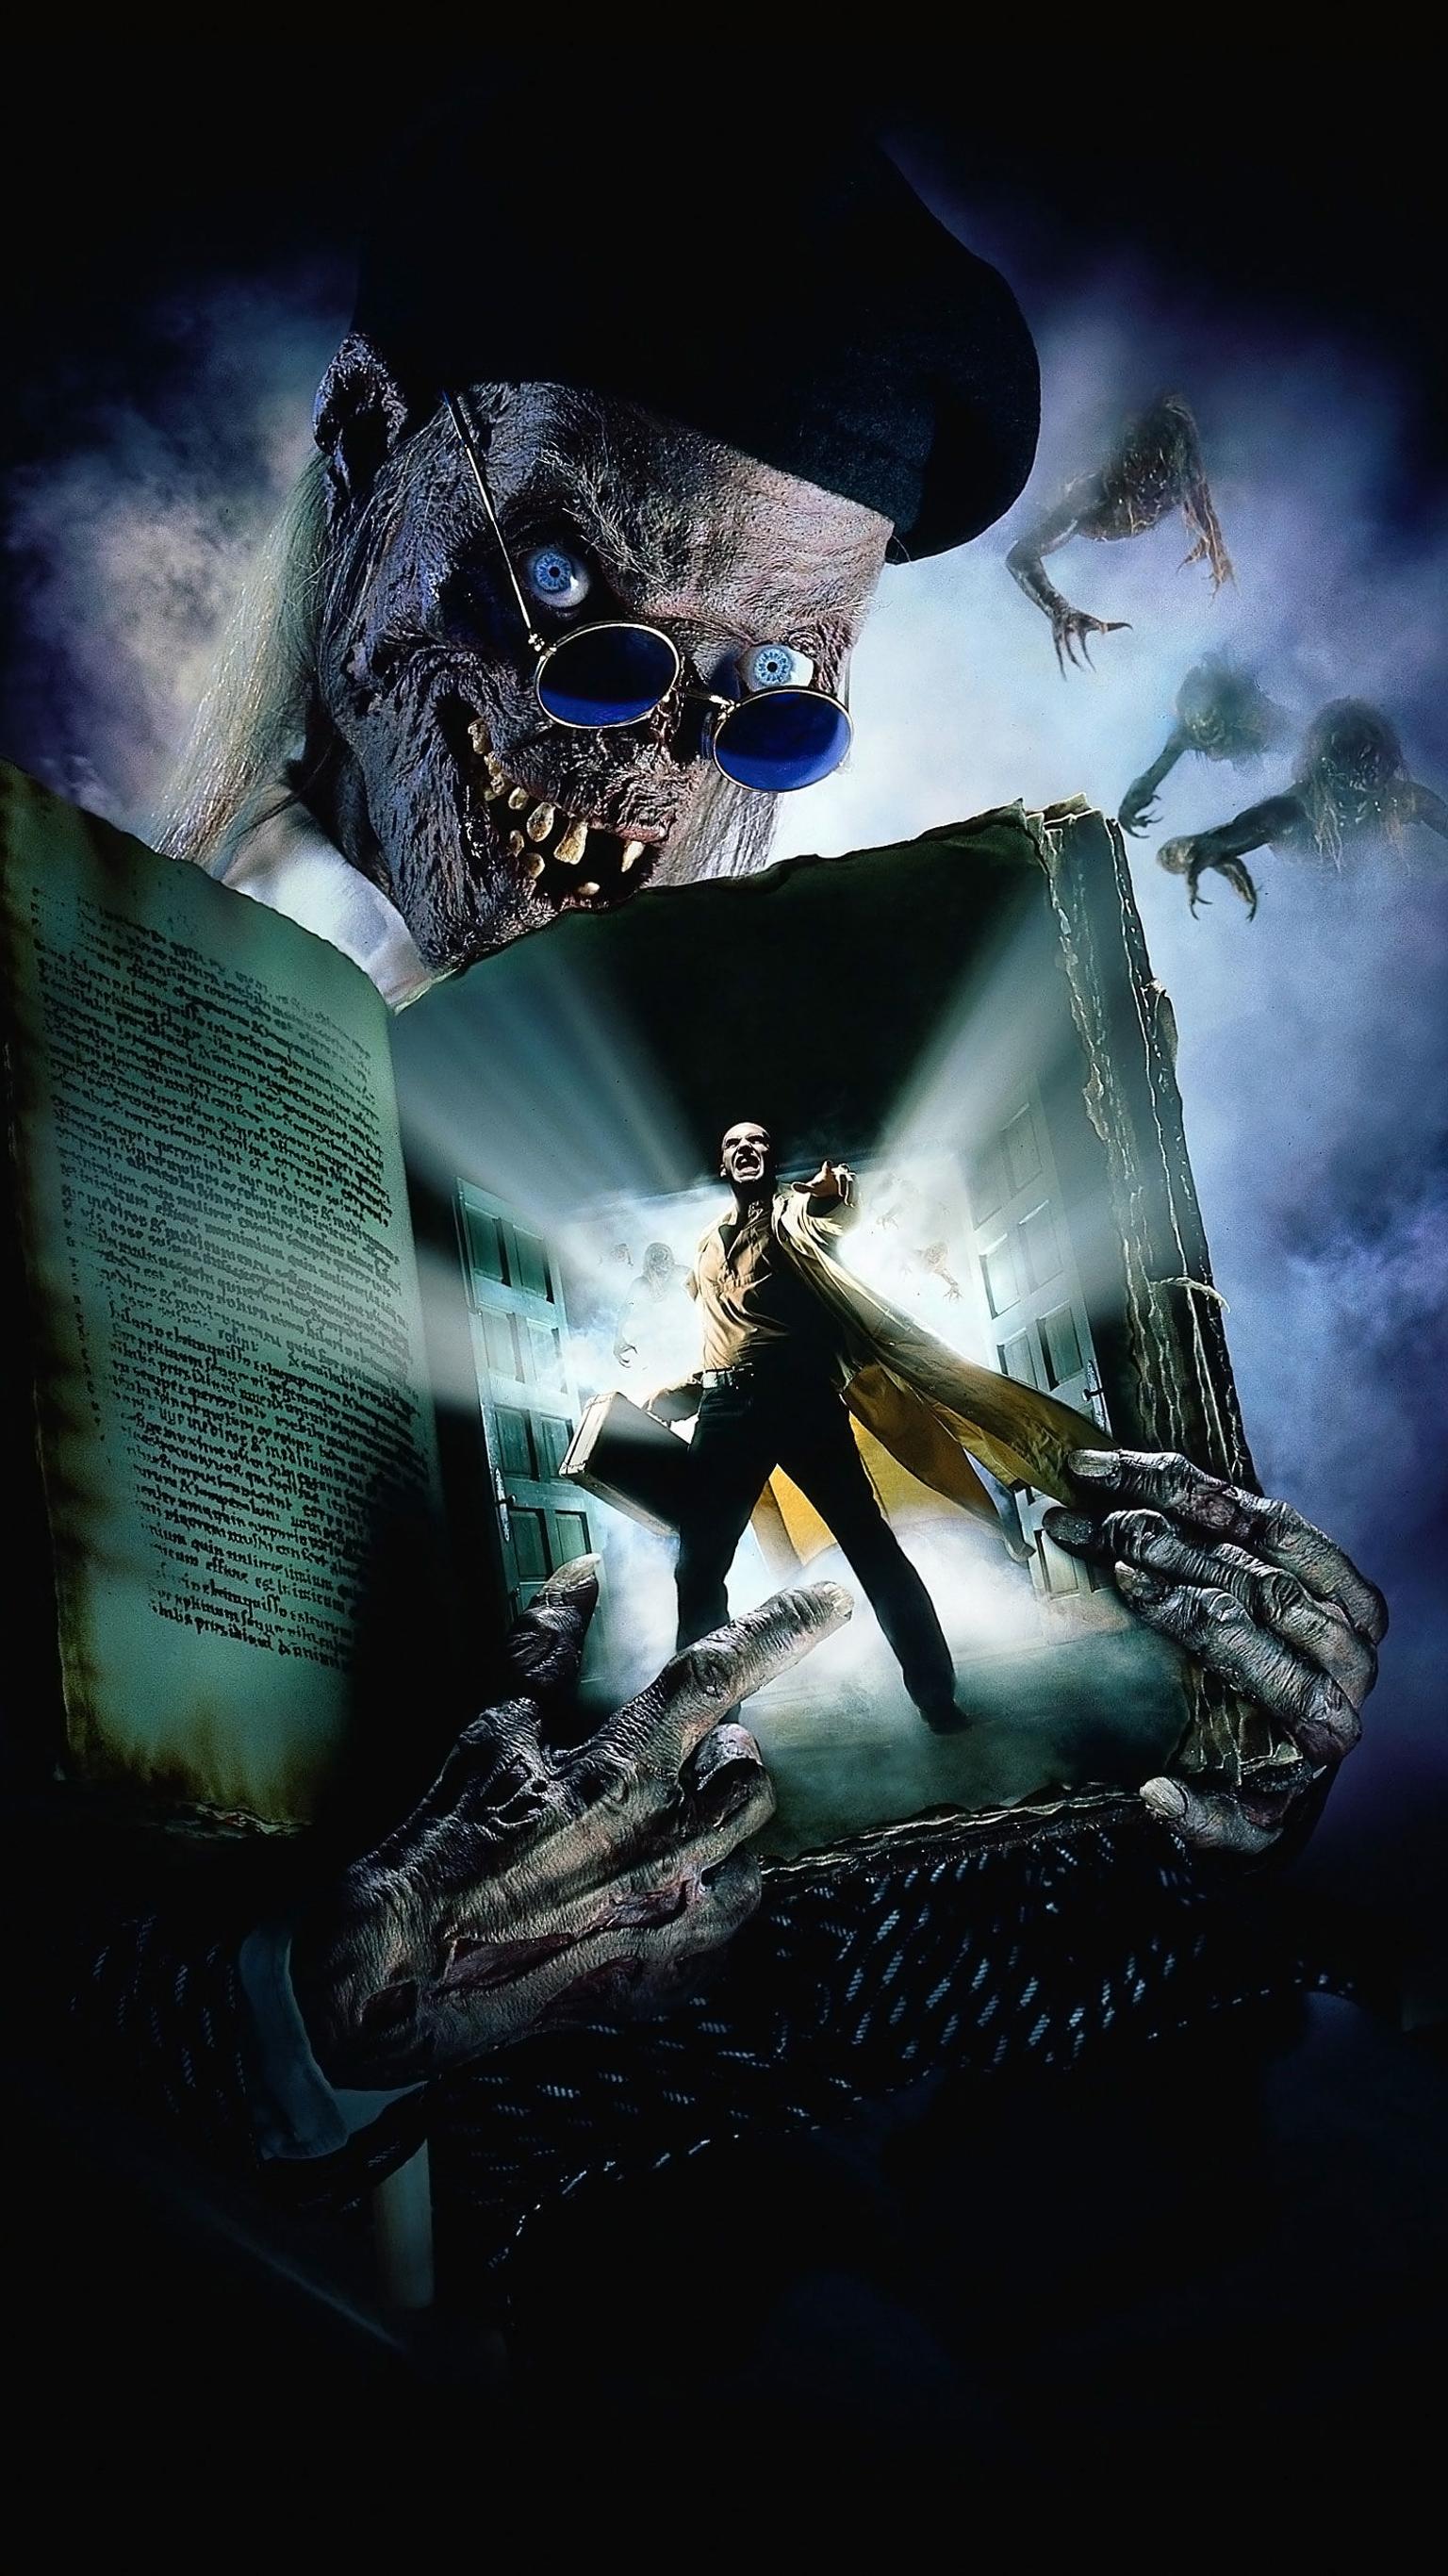 Tales from the Crypt: Demon Knight (1995) Phone Wallpaper